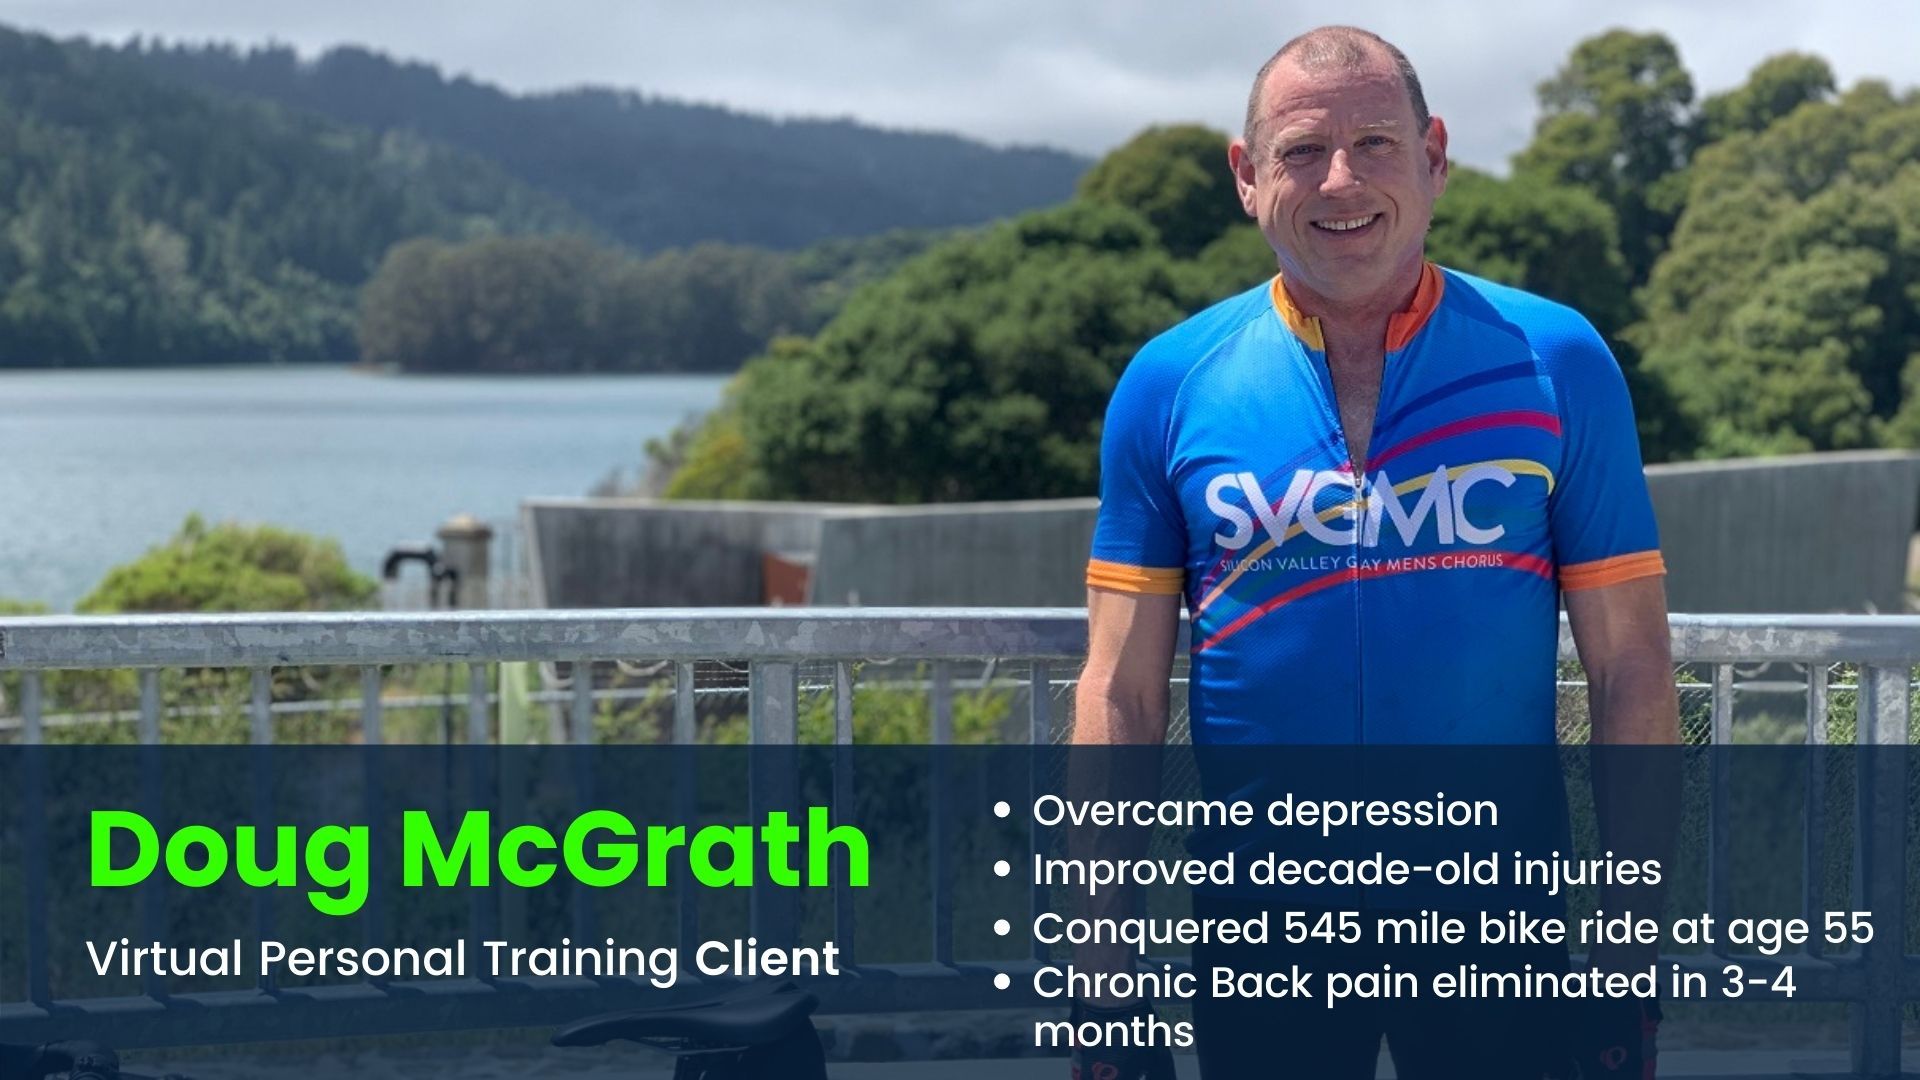 1-on-1 virtual training client improved old injuries and is riding his bike